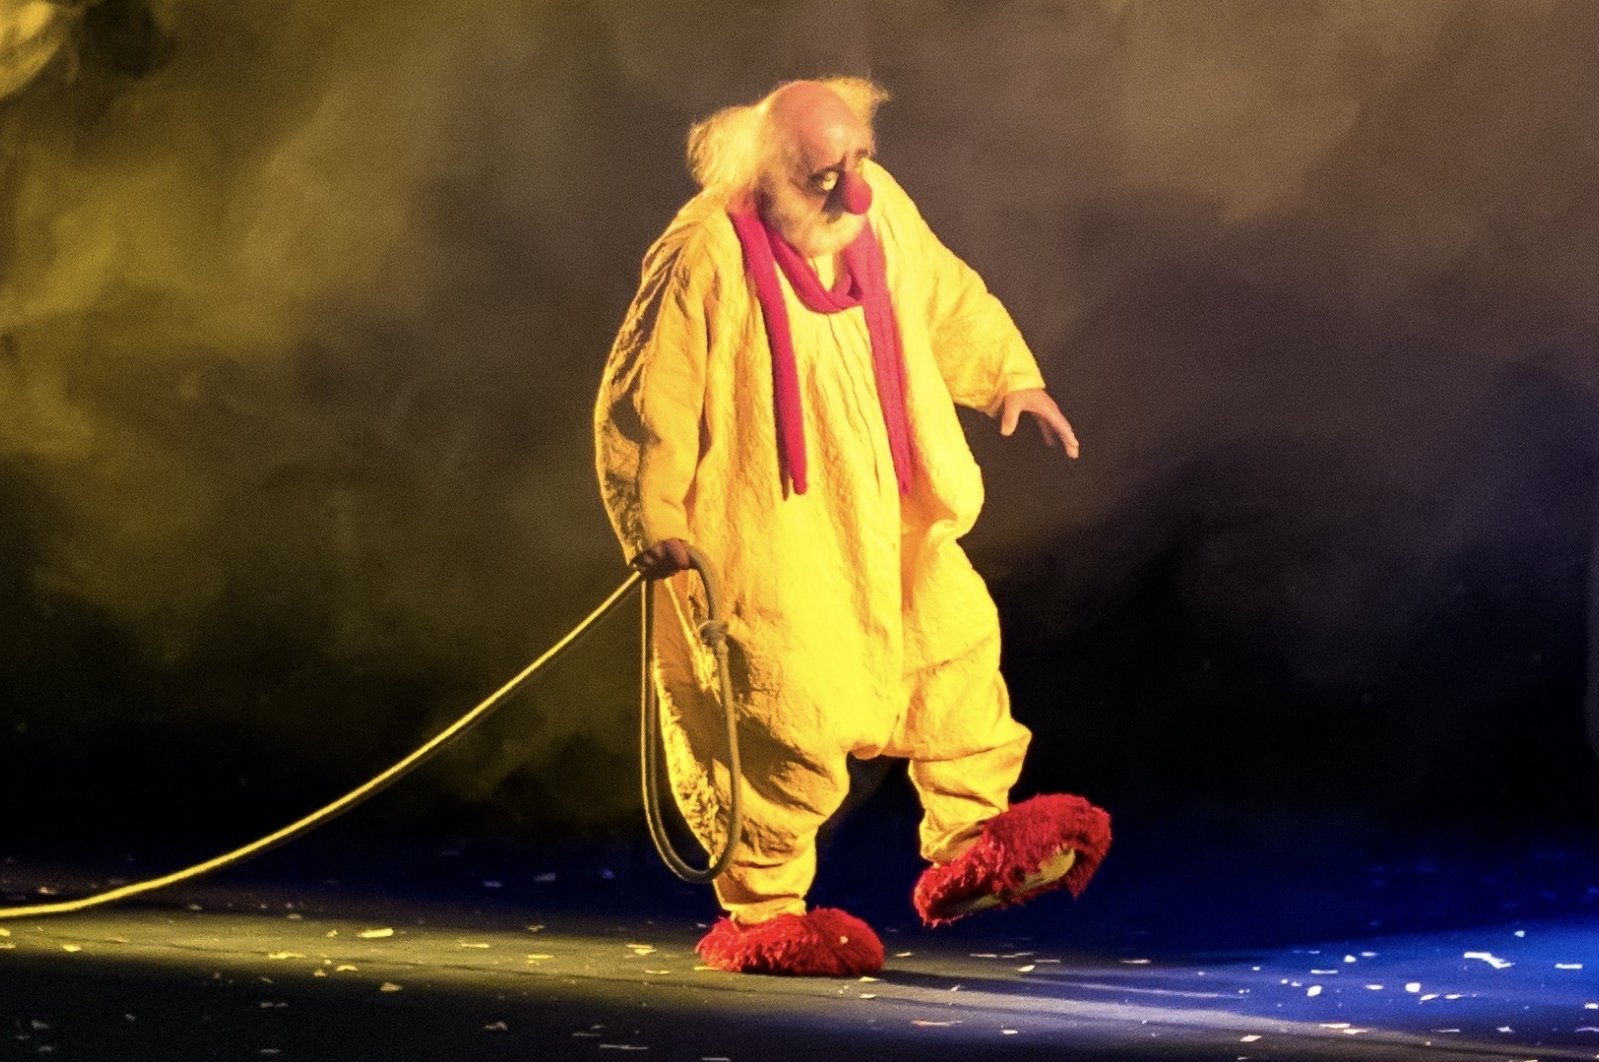 Nominated for &quot;Best Special Theatrical Event&quot; at the Tony Awards and honored with the &quot;Unique Theatrical Experience&quot; award at the Drama Desk Awards, &quot;Slava’s Snowshow&quot; derives from the brilliance of Slava Polunin. (Photo courtesy of Zorlu PSM)